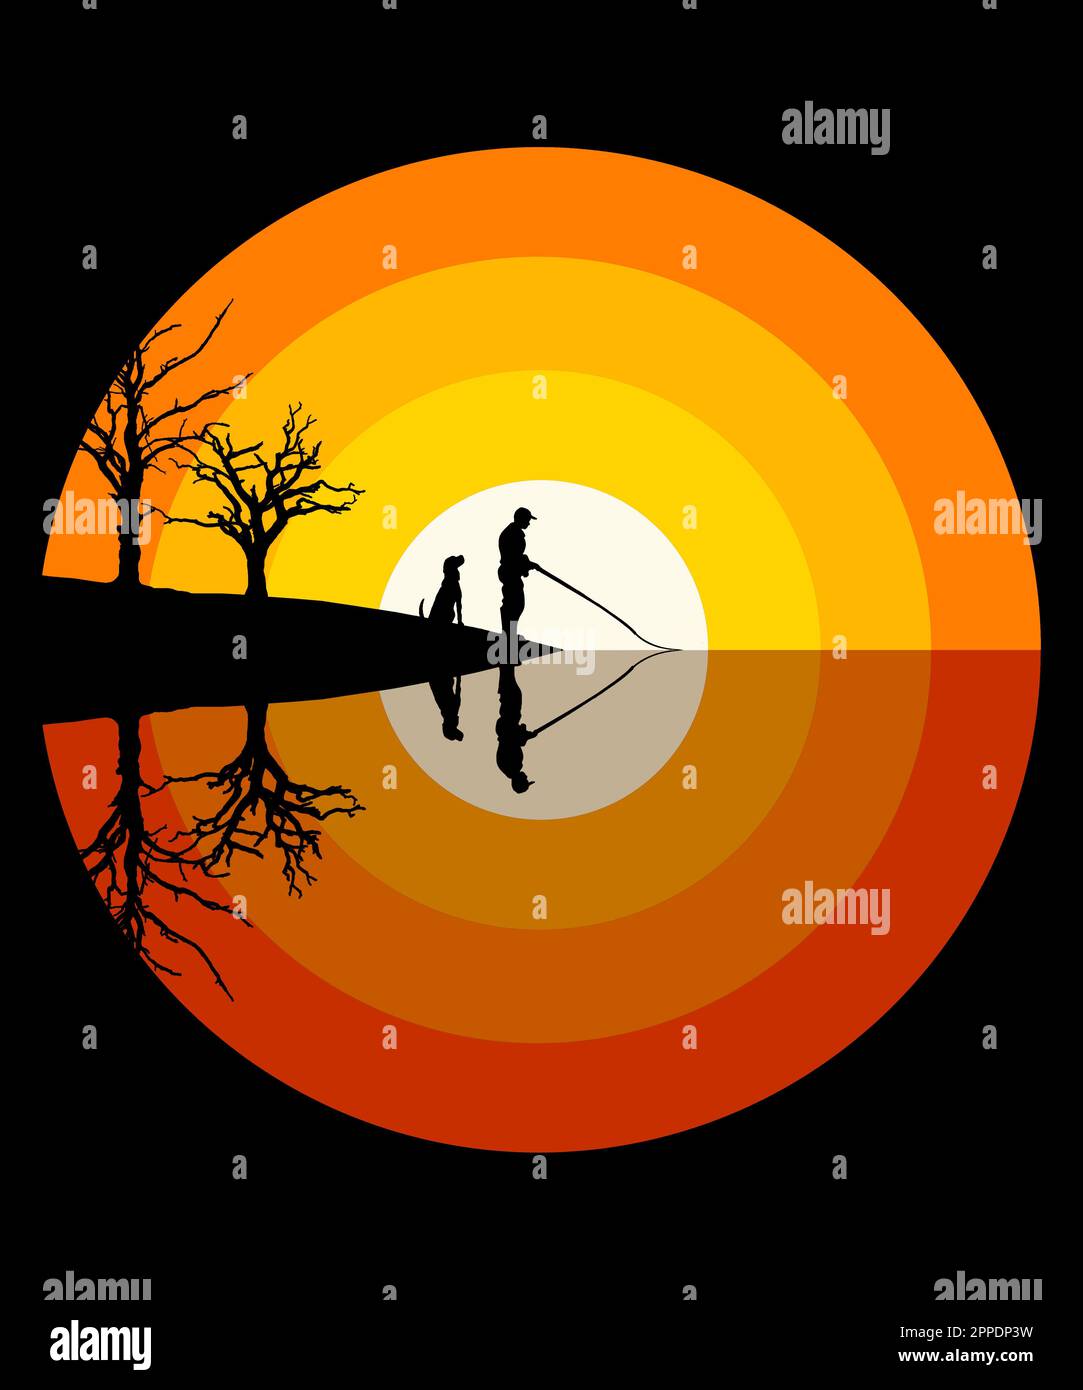 Here is a wilderness sunset that is a graphic concentric circle design. A man fishes at sunset with his faithful dog at he side in a vector illustrati Stock Photo